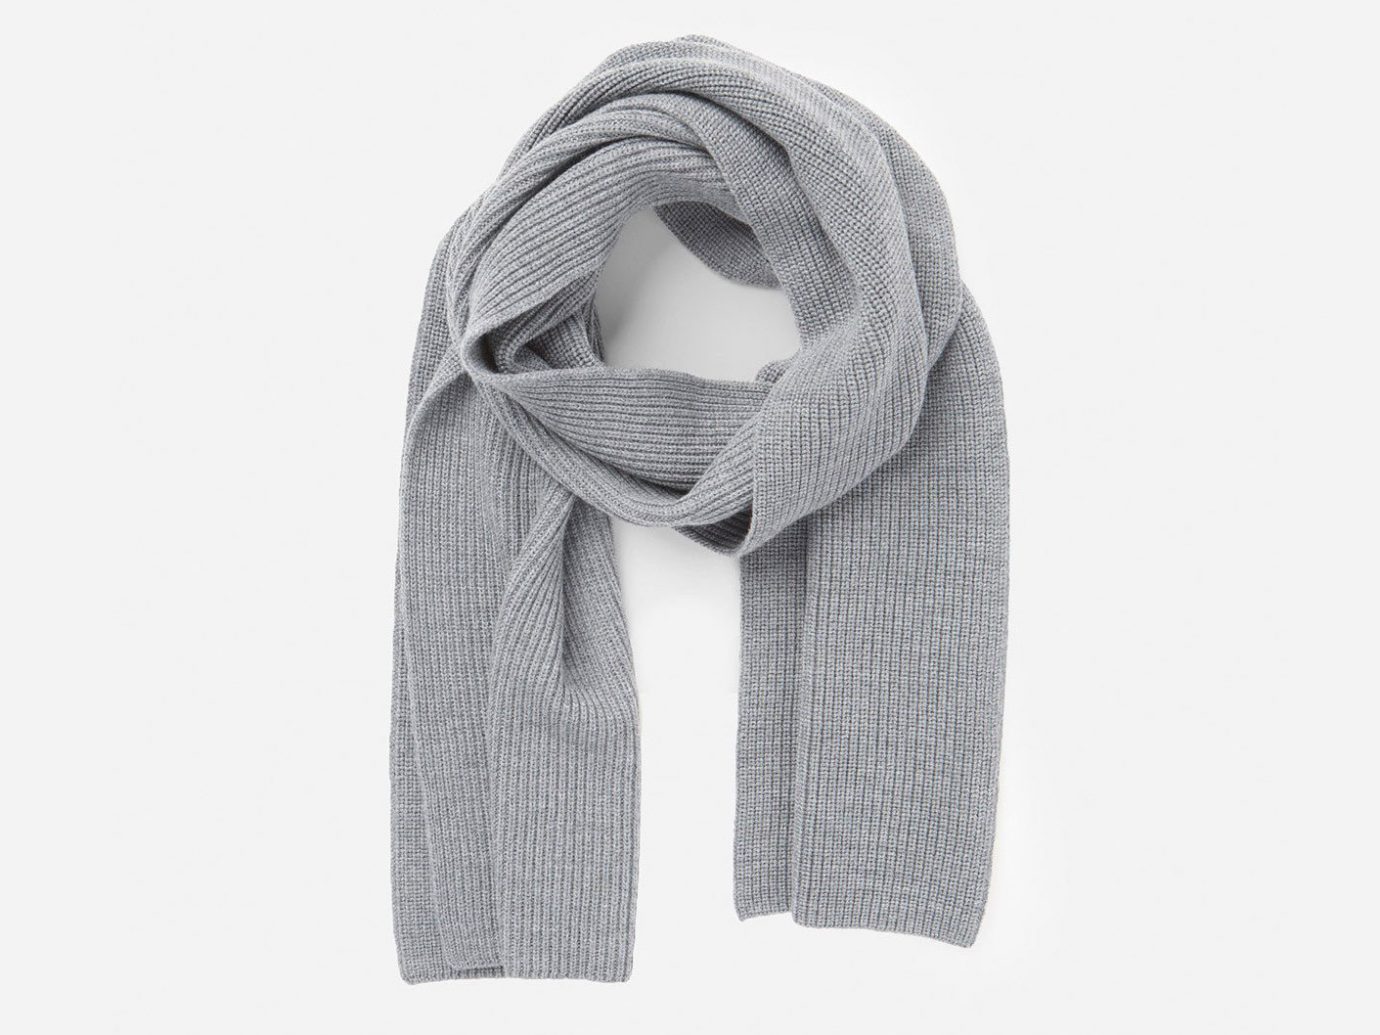 Style + Design clothing scarf wearing fashion accessory pattern wool Design sleeve textile